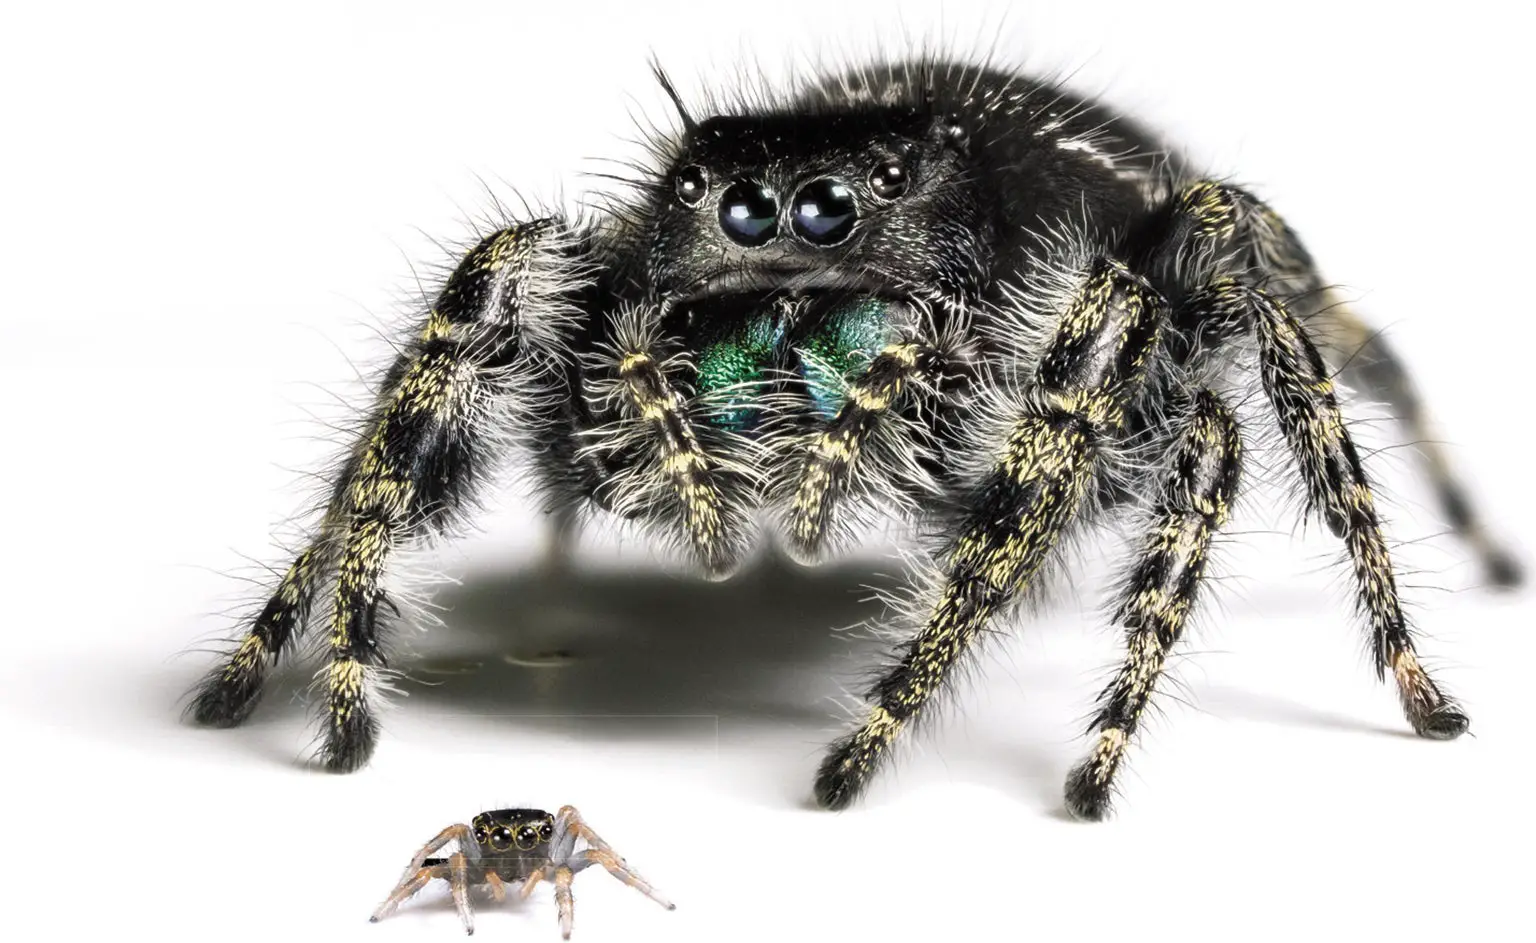 What Are Baby Spiders Called?